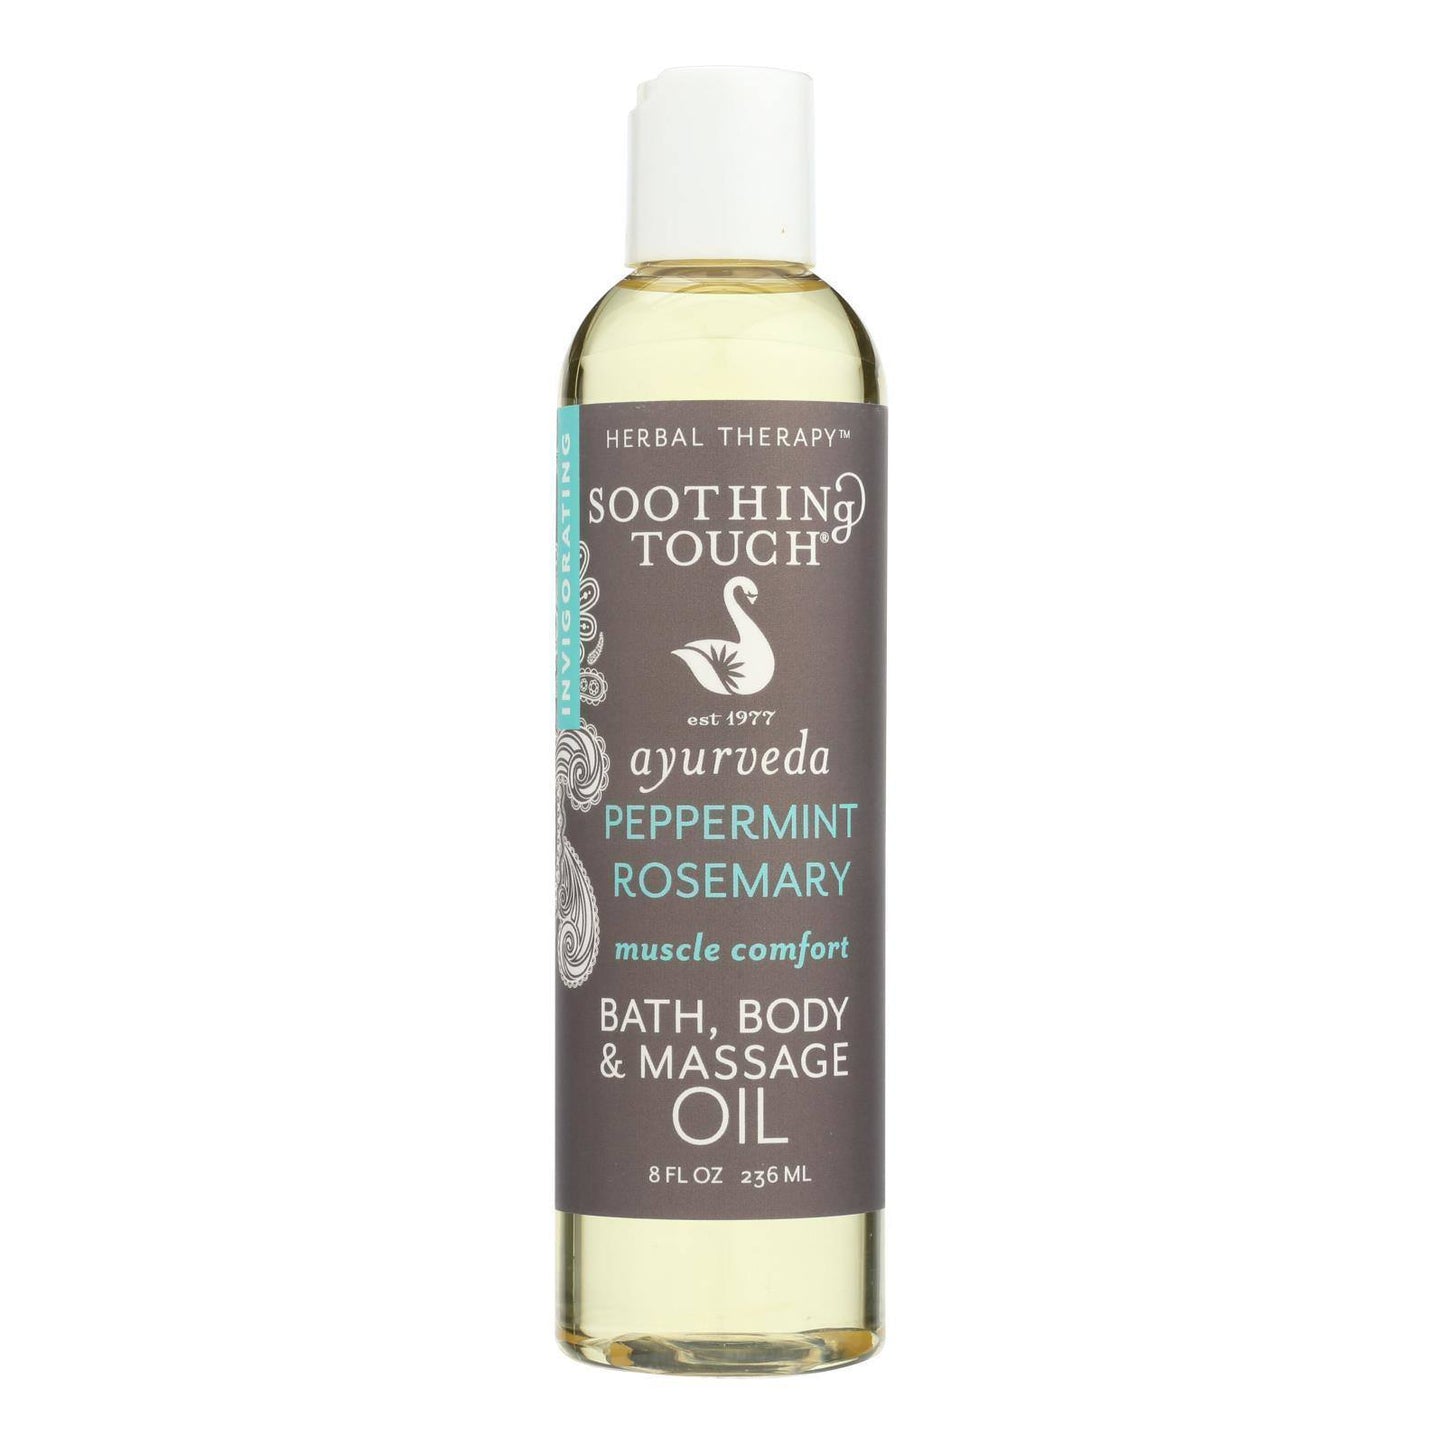 Bath and Body Oil - Muscle Comfort